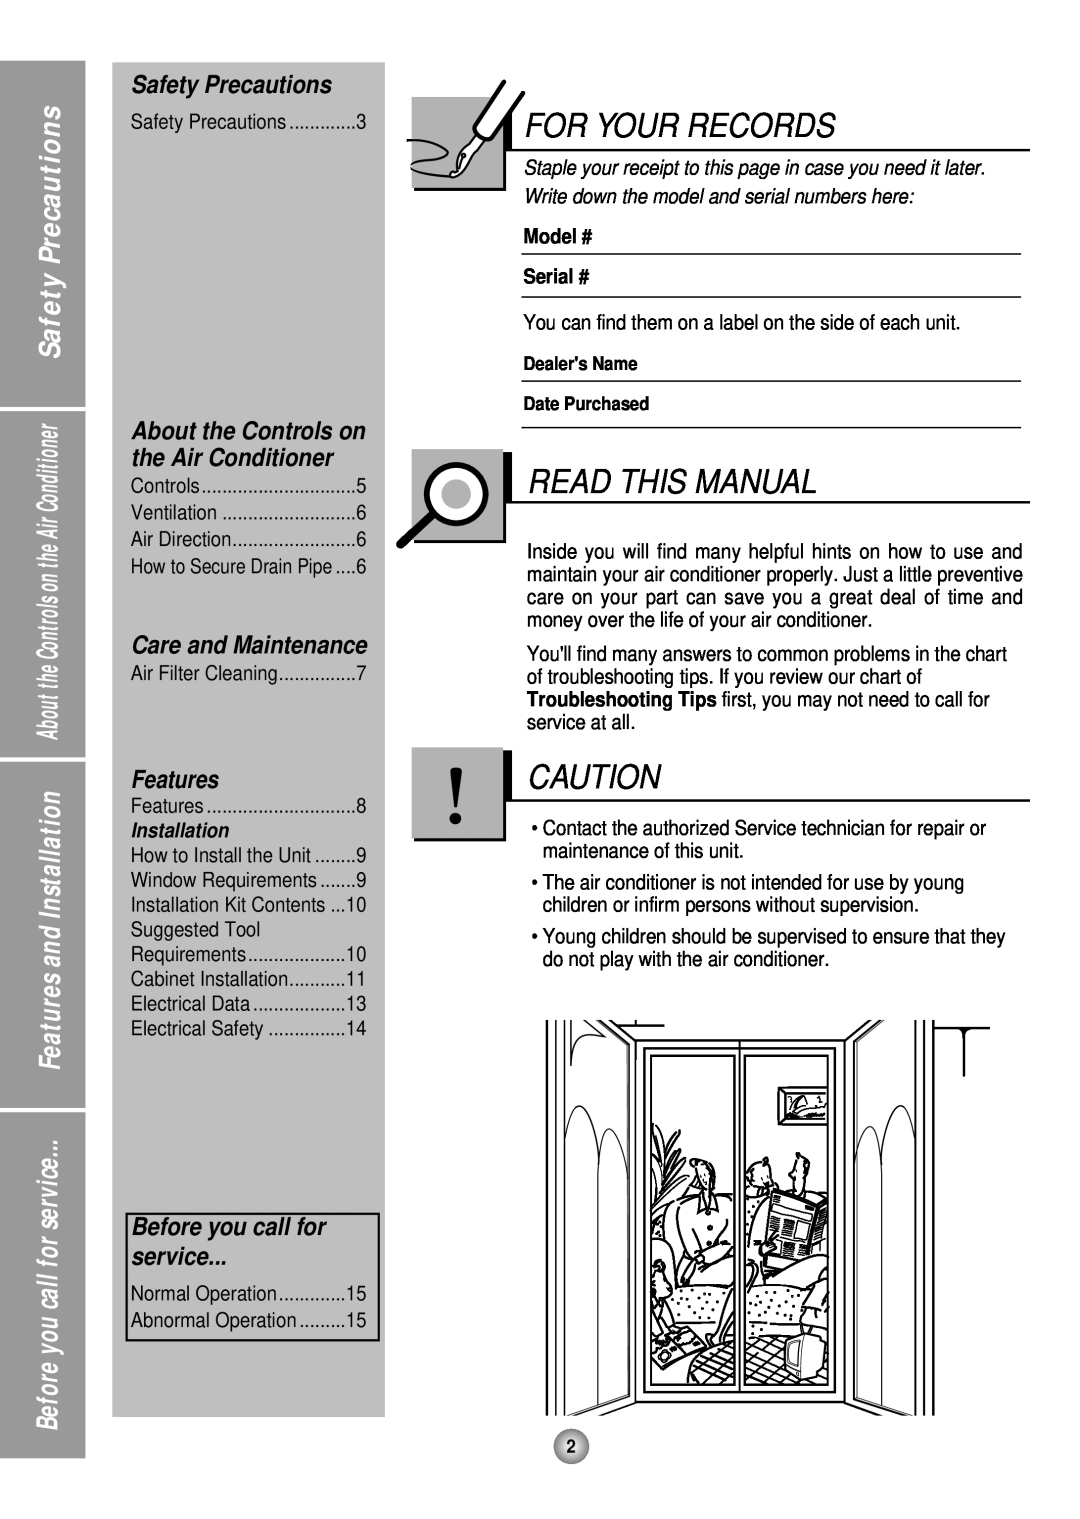 Quasar HQ-2081TH manual For Your Records, Read This Manual, Safety Precautions, Care and Maintenance, Features, service 